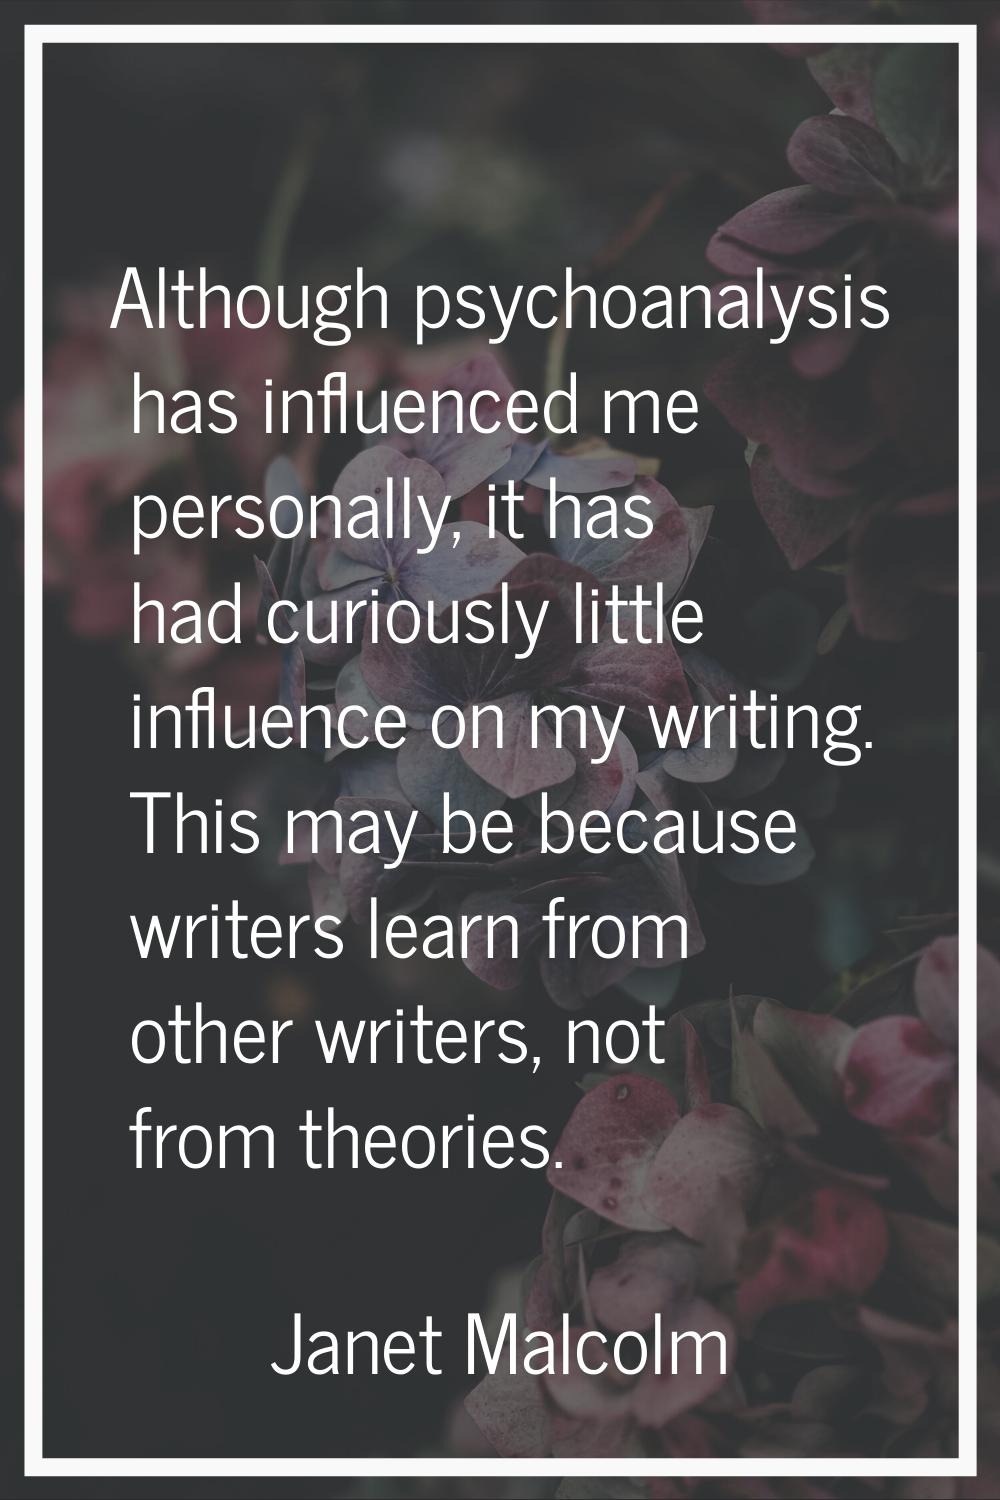 Although psychoanalysis has influenced me personally, it has had curiously little influence on my w